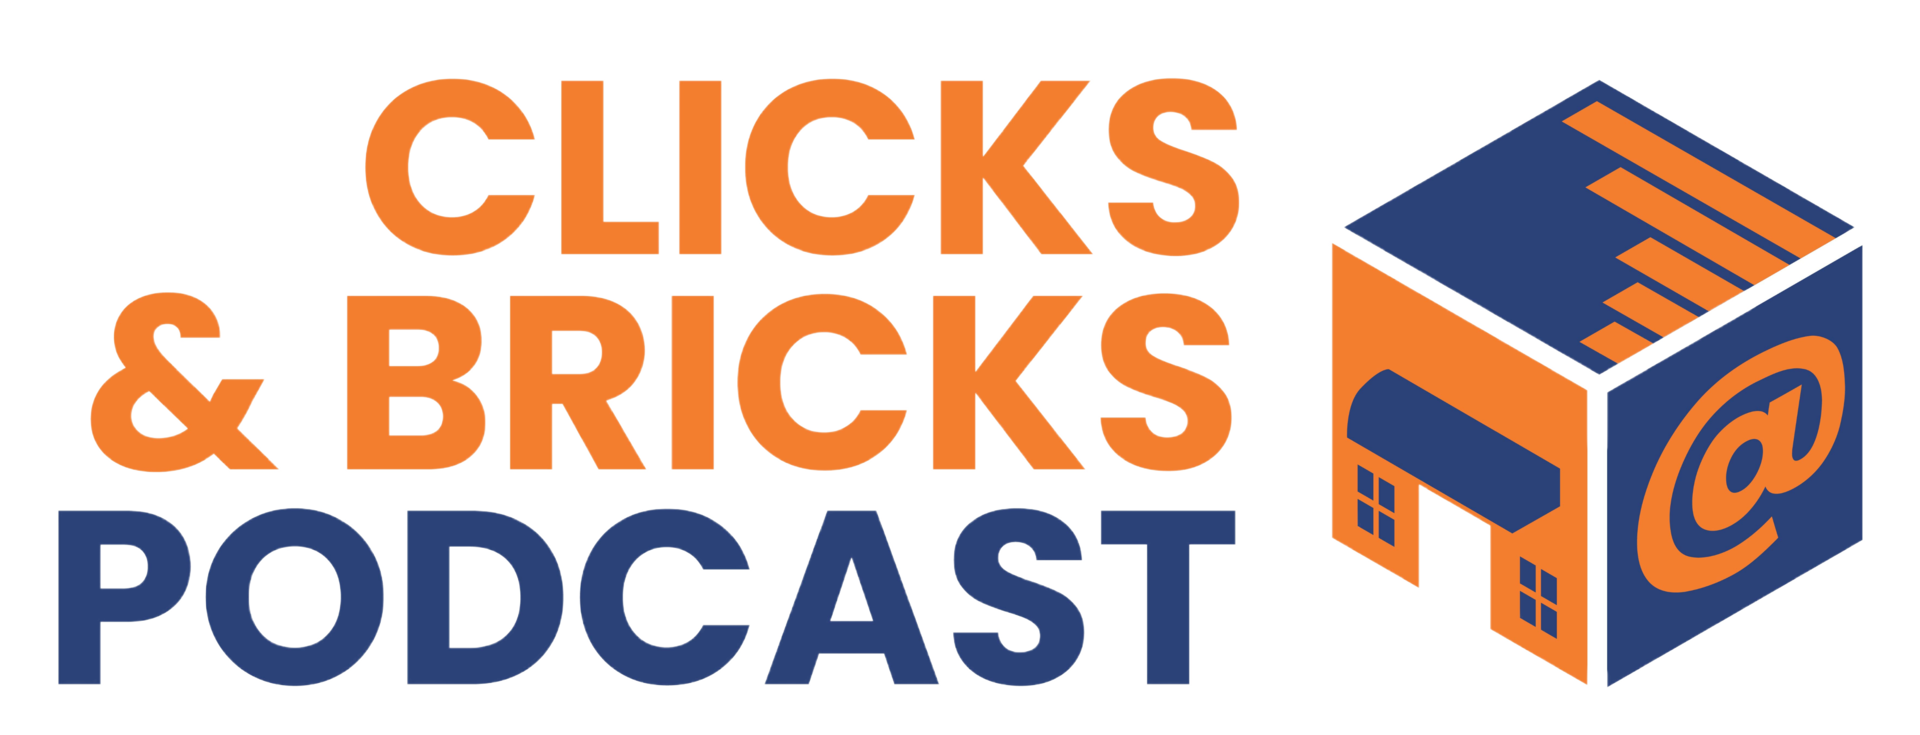 Clicks & Bricks Podcast Announces Interview with Sonia Couto, Start-Up & Software Technology Leader